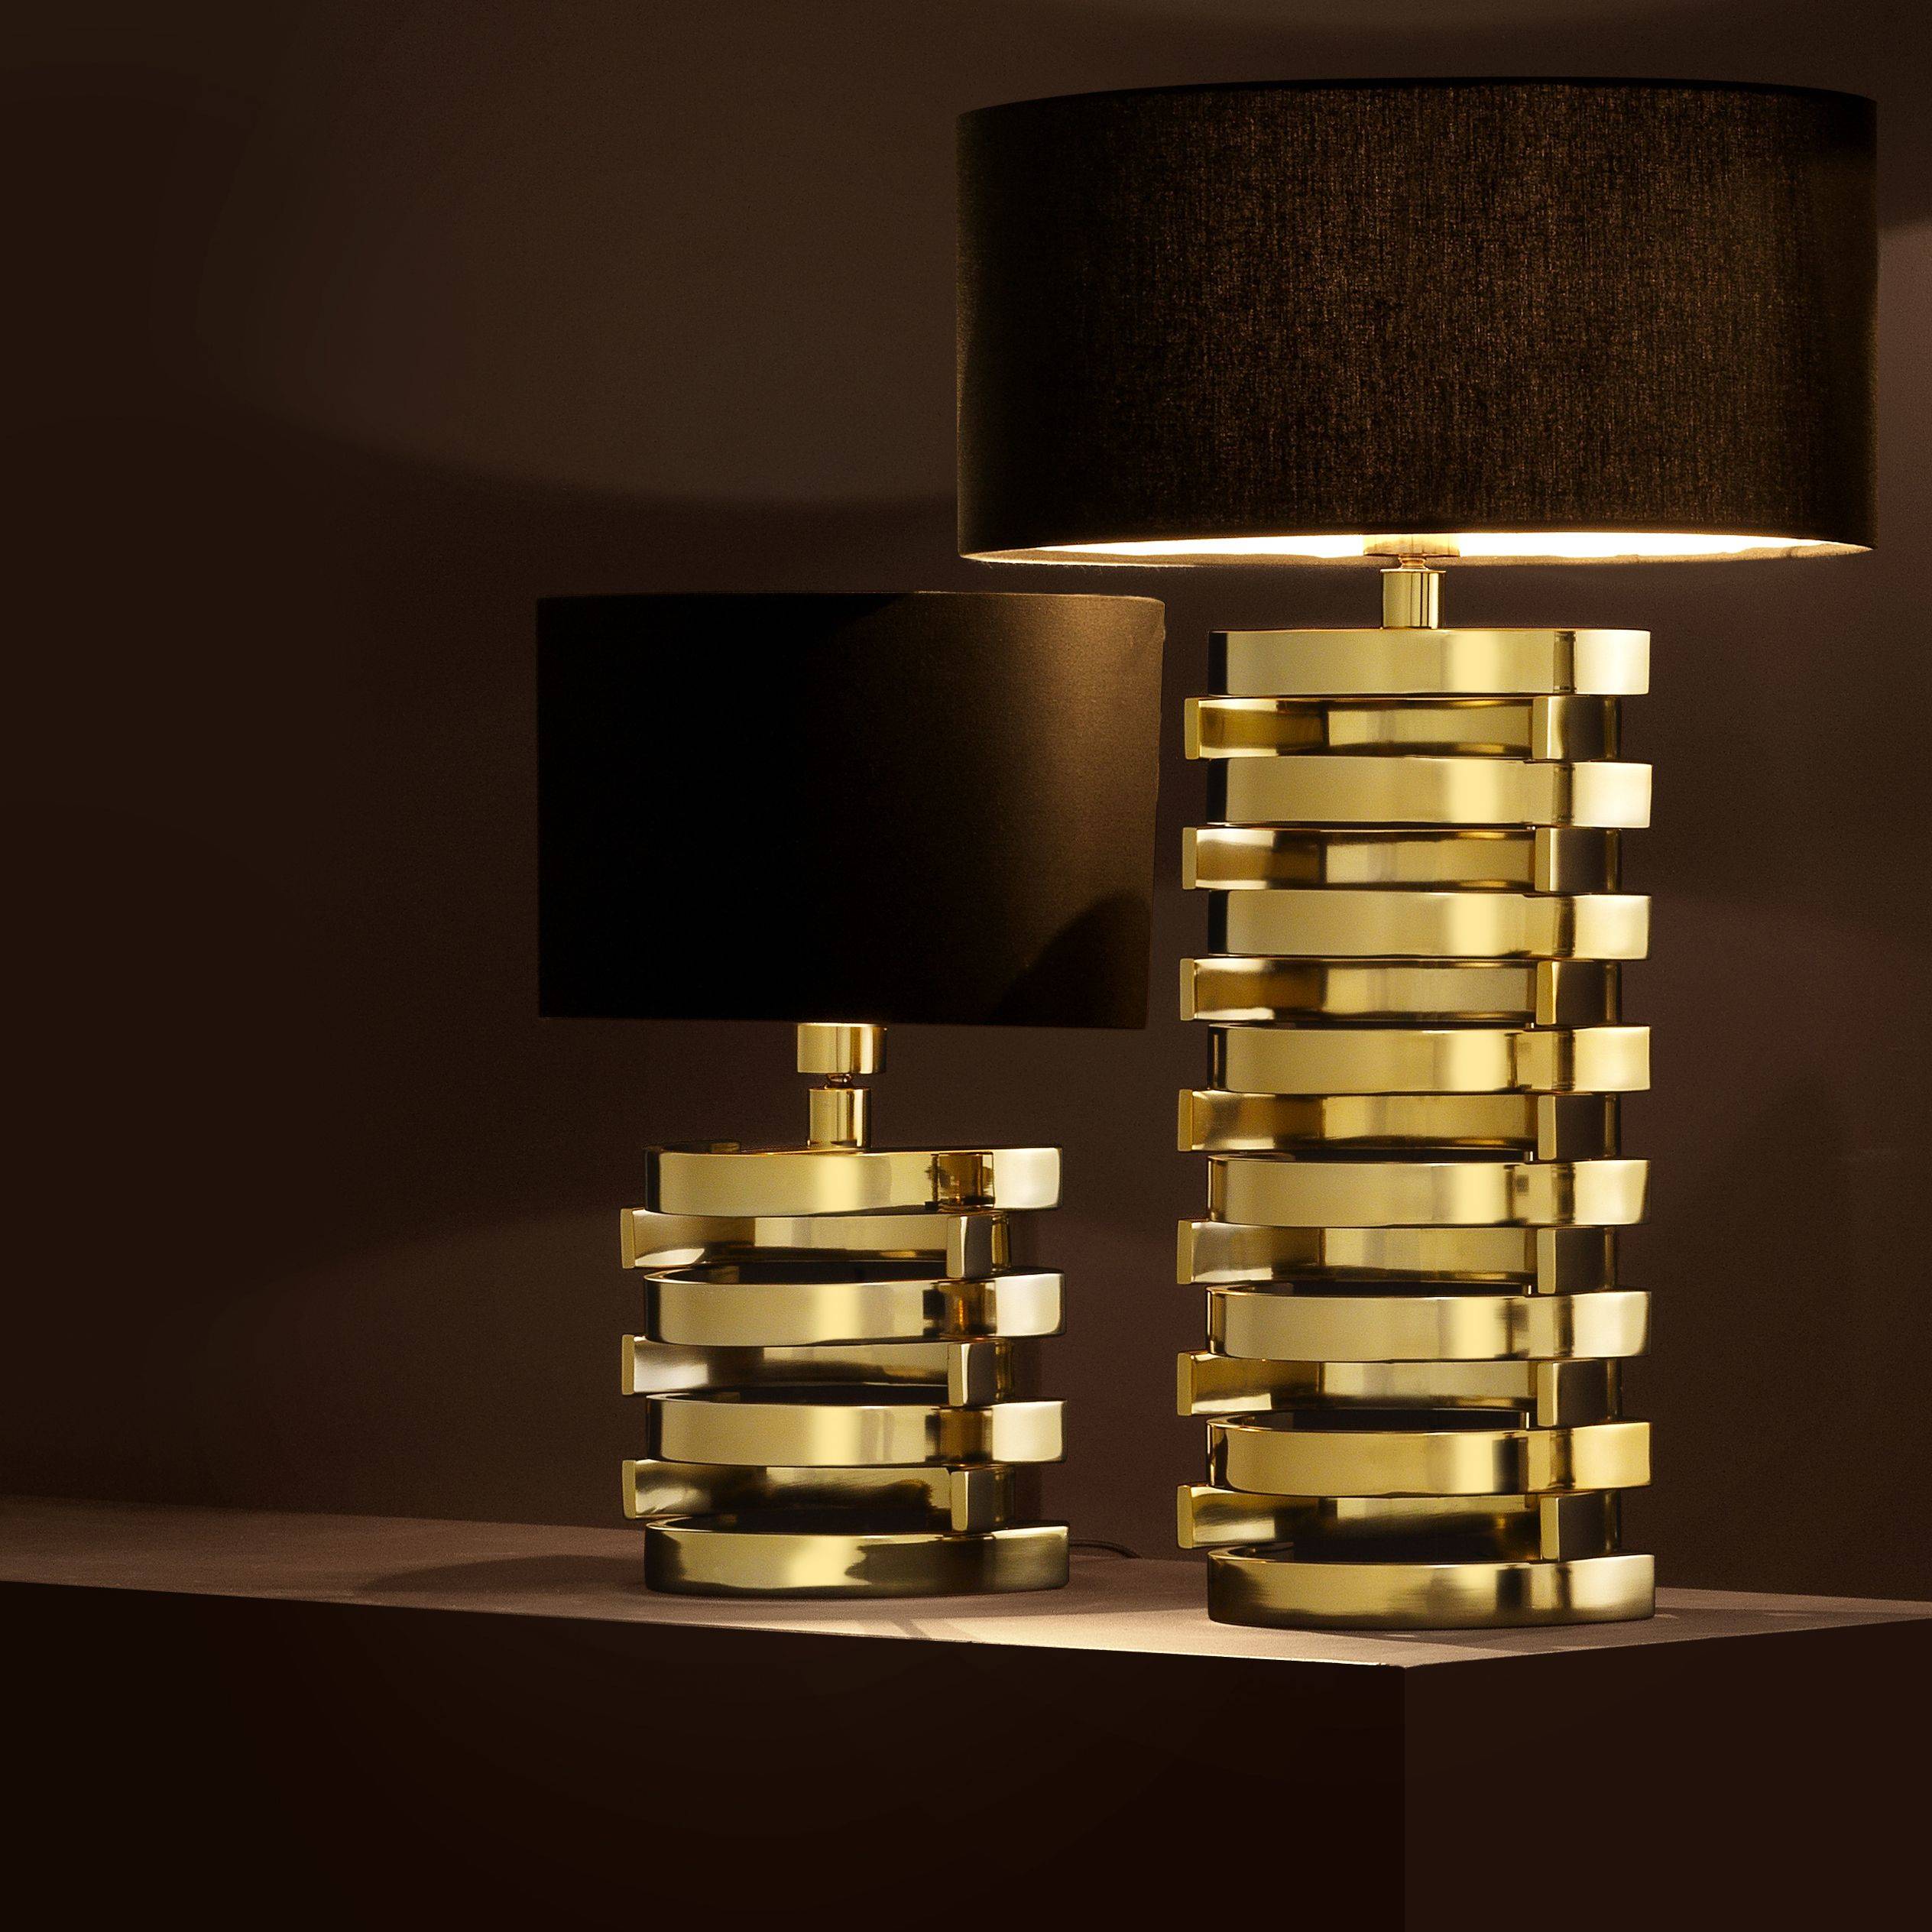 Boxter Table Lamps[S/L] - [Gold/Nickel] - Eichholtz - Luxury Lighting Boutique